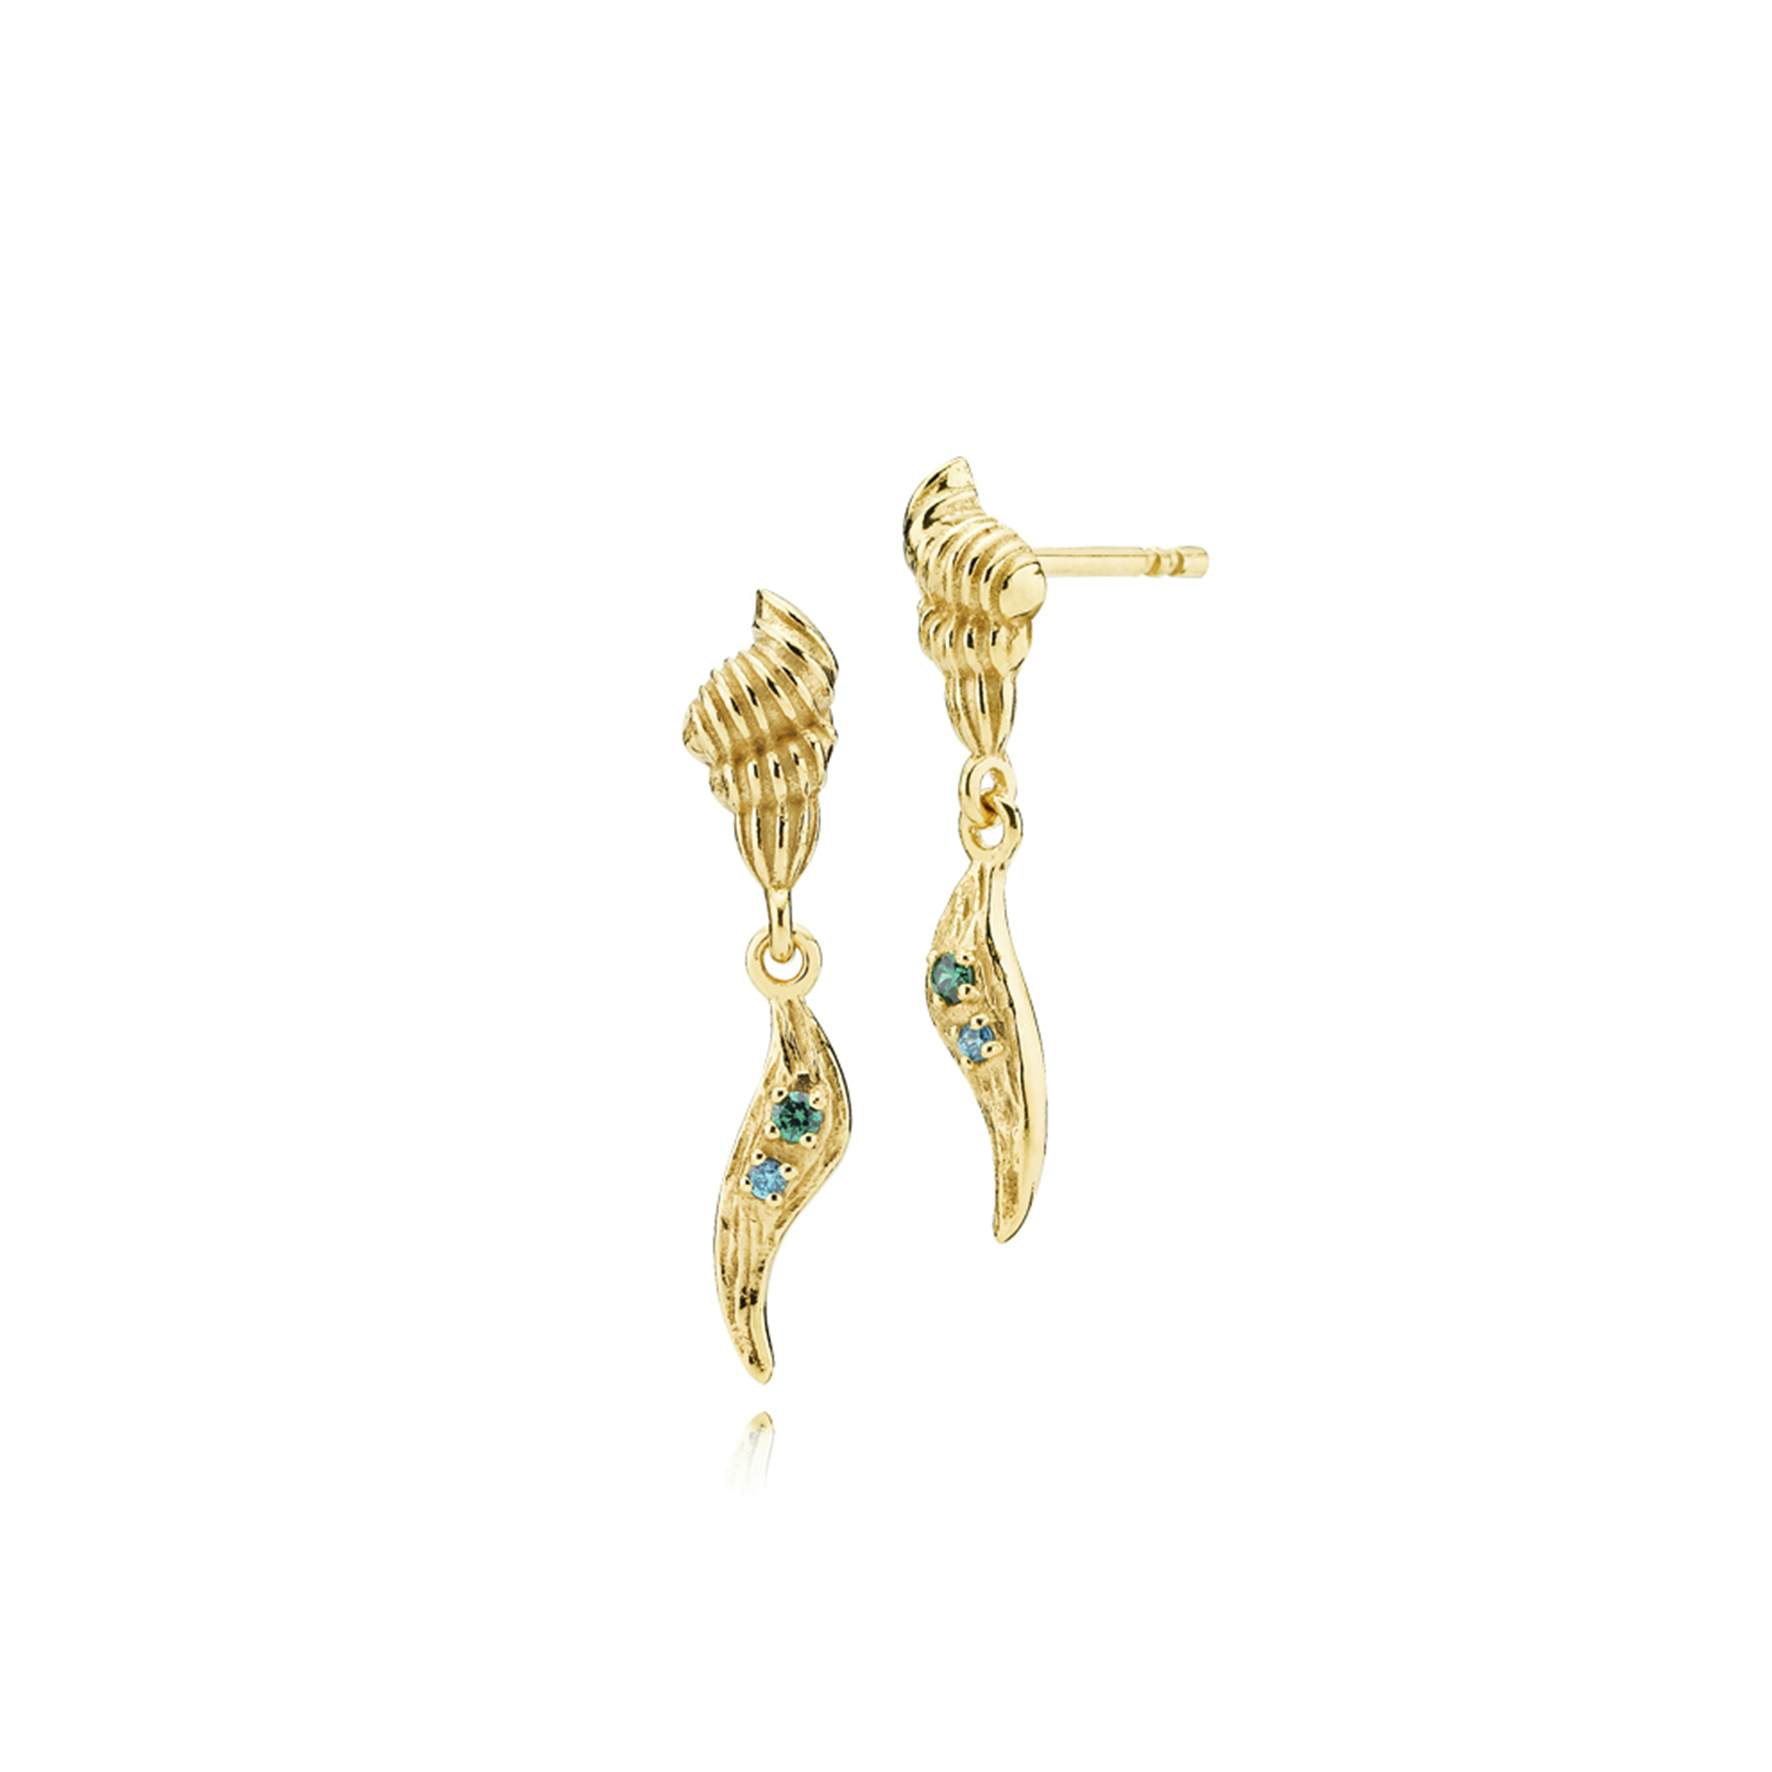 Kaia Earrings Green Onyx and Blue Topas from Sistie in Goldplated-Silver Sterling 925